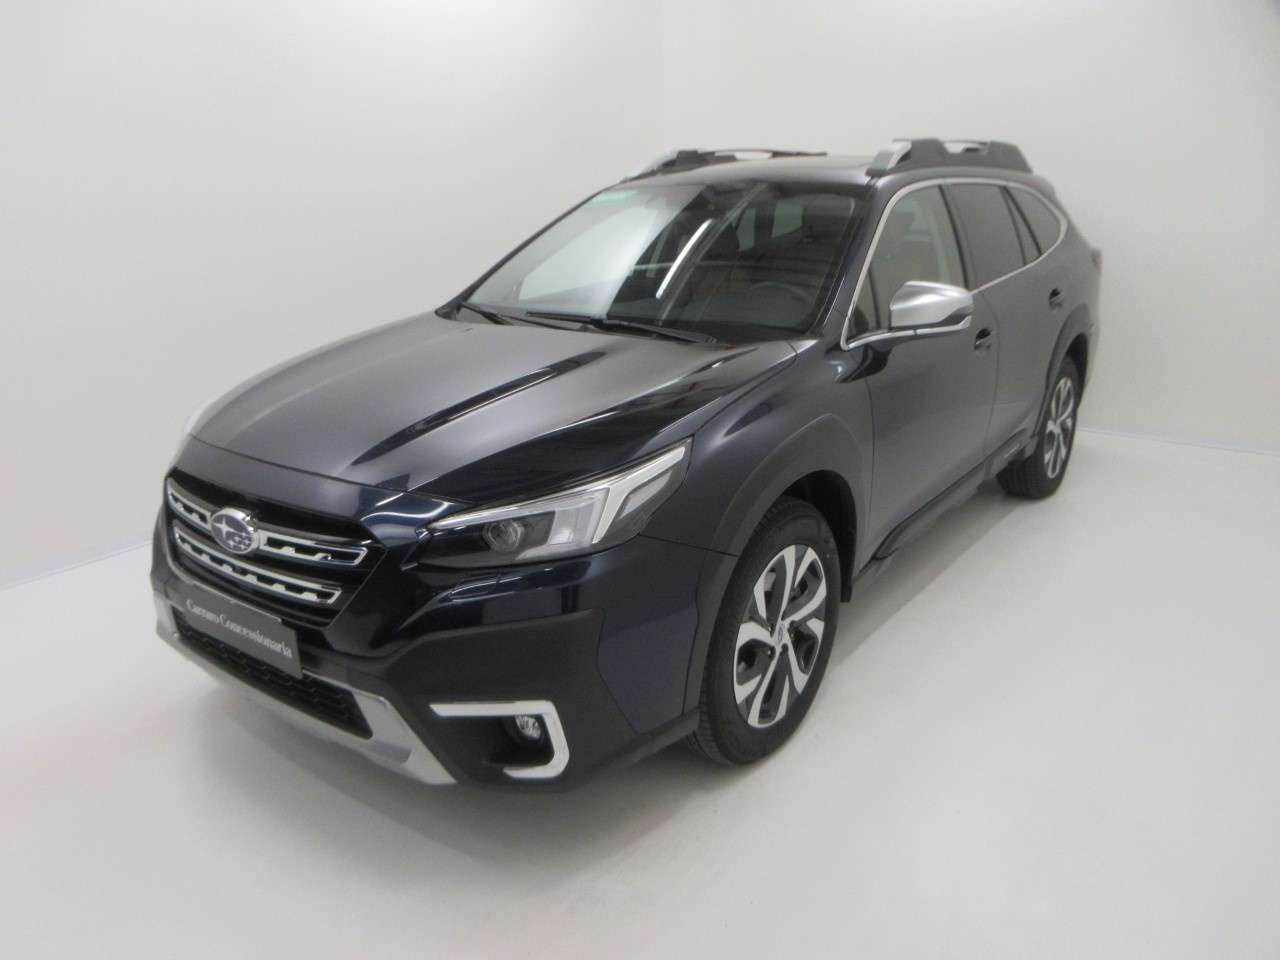 Subaru OUTBACK Off-Road/Pick-up in Blue used in Treviso - Tv for € 39,900.-